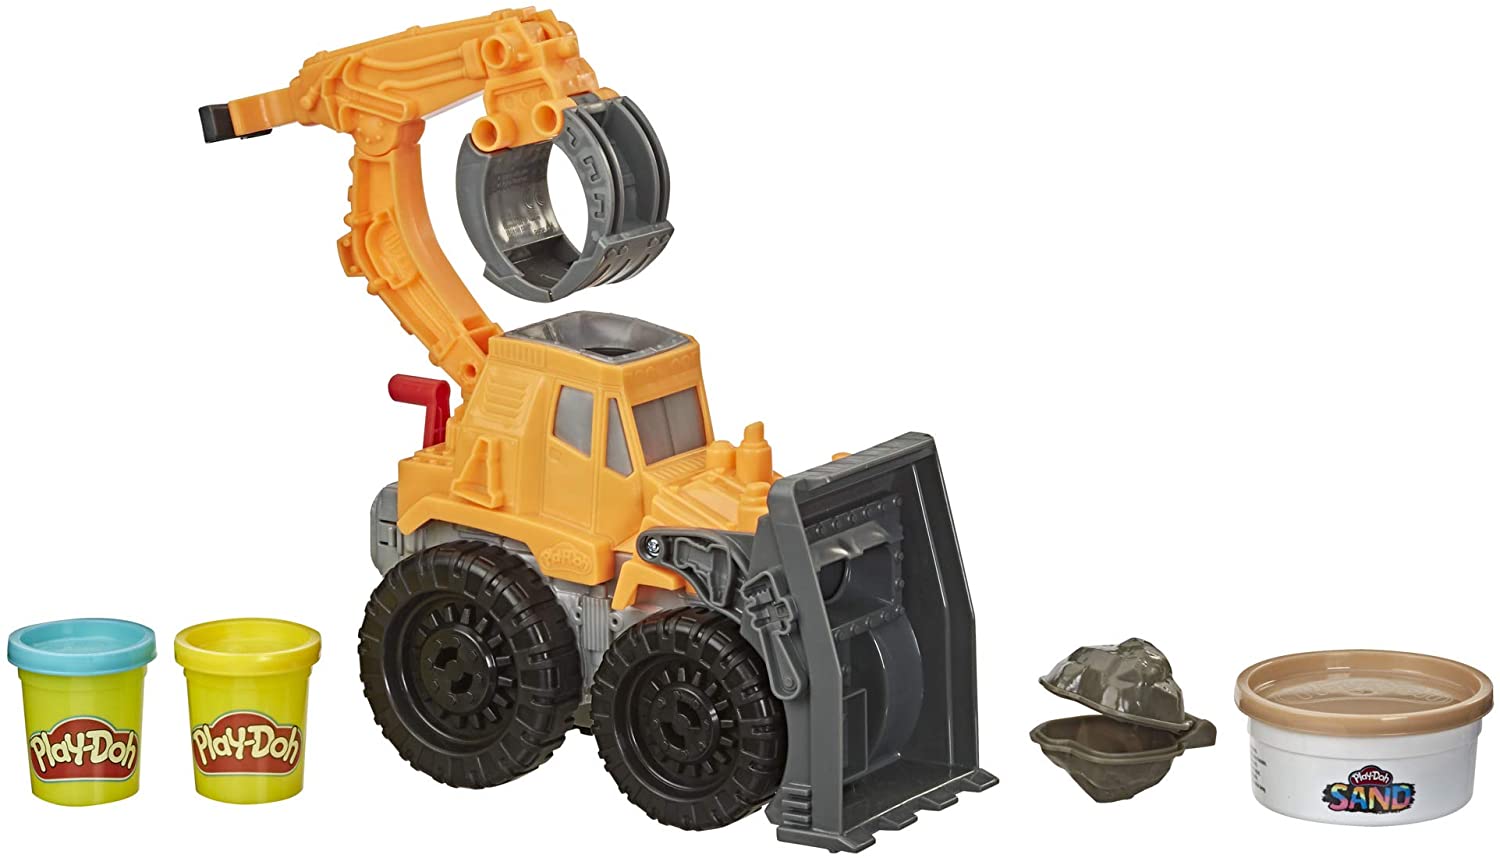 Play-Doh Wheels Front Loader Toy Truck w/ Sand Compound & Two Classic Compounds $11 + Free Shipping w/ Prime or $25+